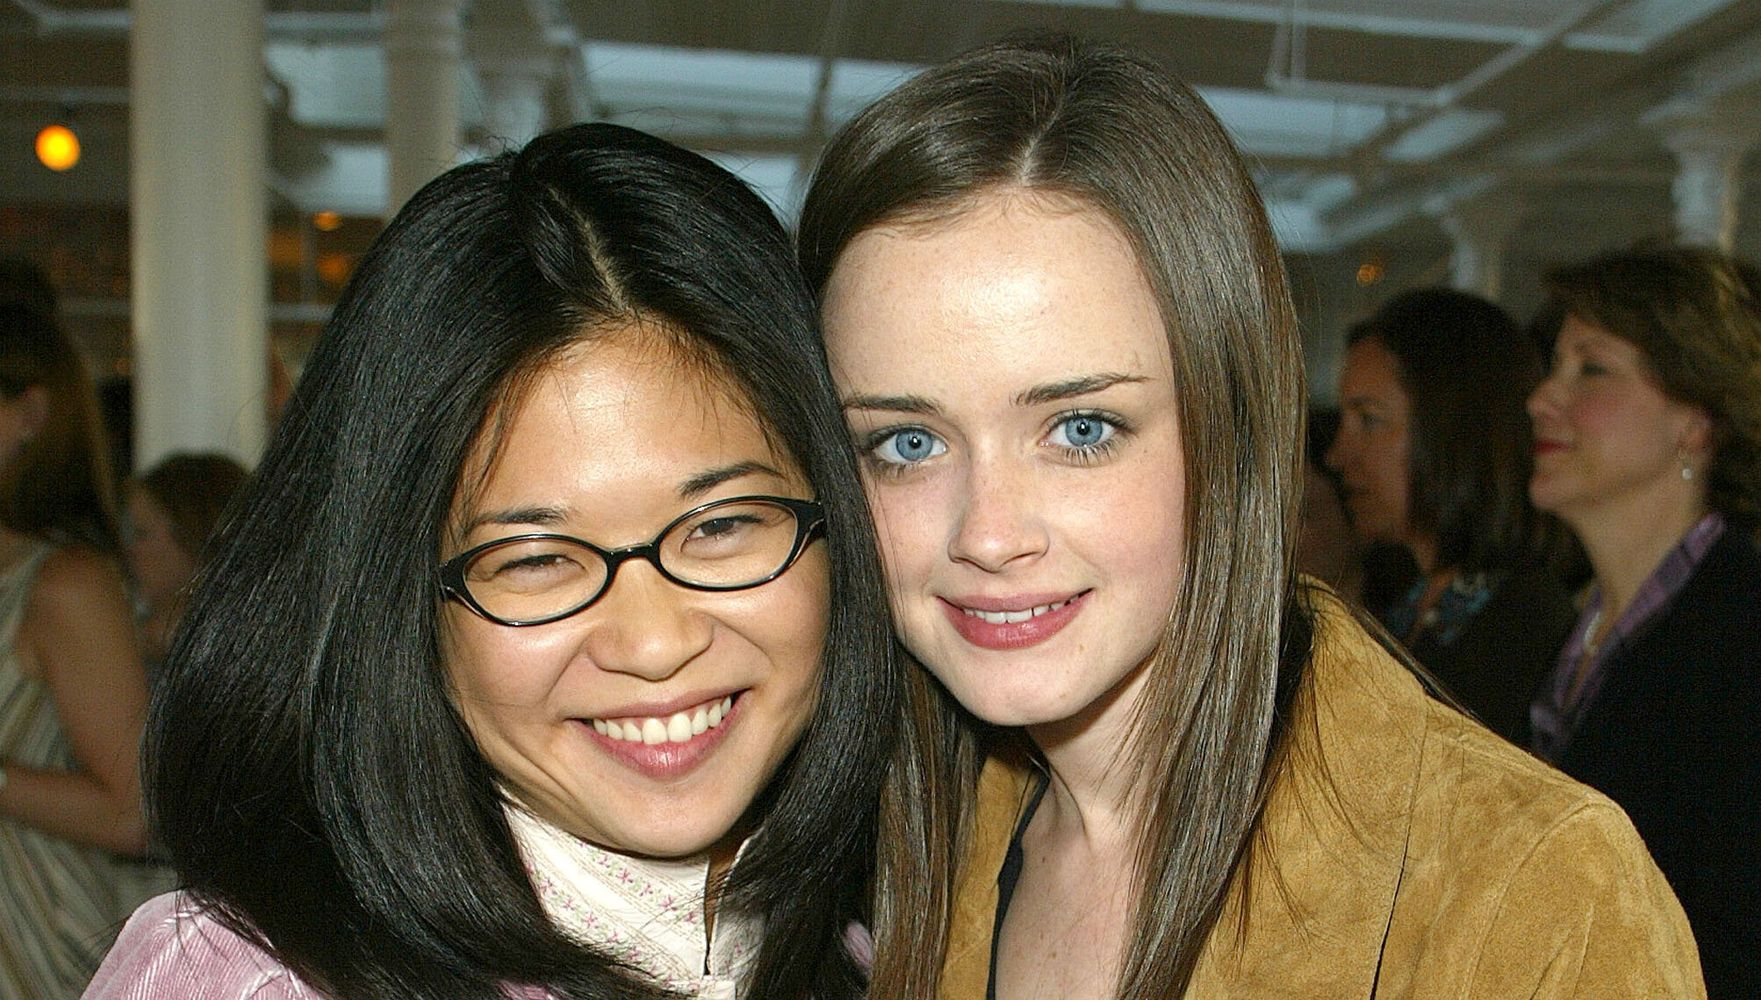 'Gilmore Girls' Star Keiko Agena On Alexis Bledel: 'I Wish We Had More Of A Friendship'